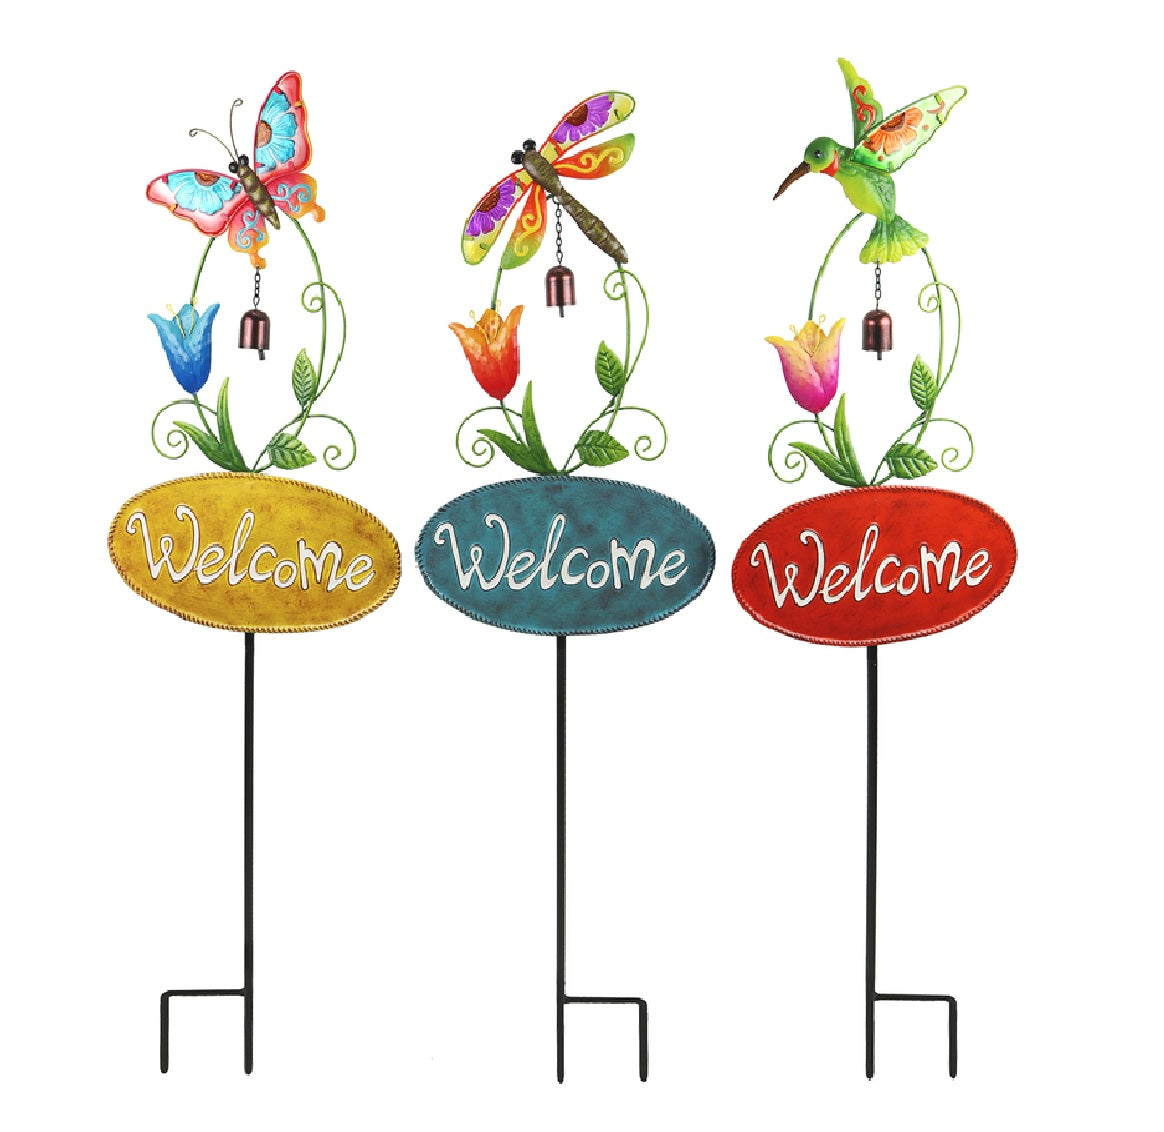 Meadowcreek ZAC47M2159 Welcome with Bell Outdoor Garden Stake